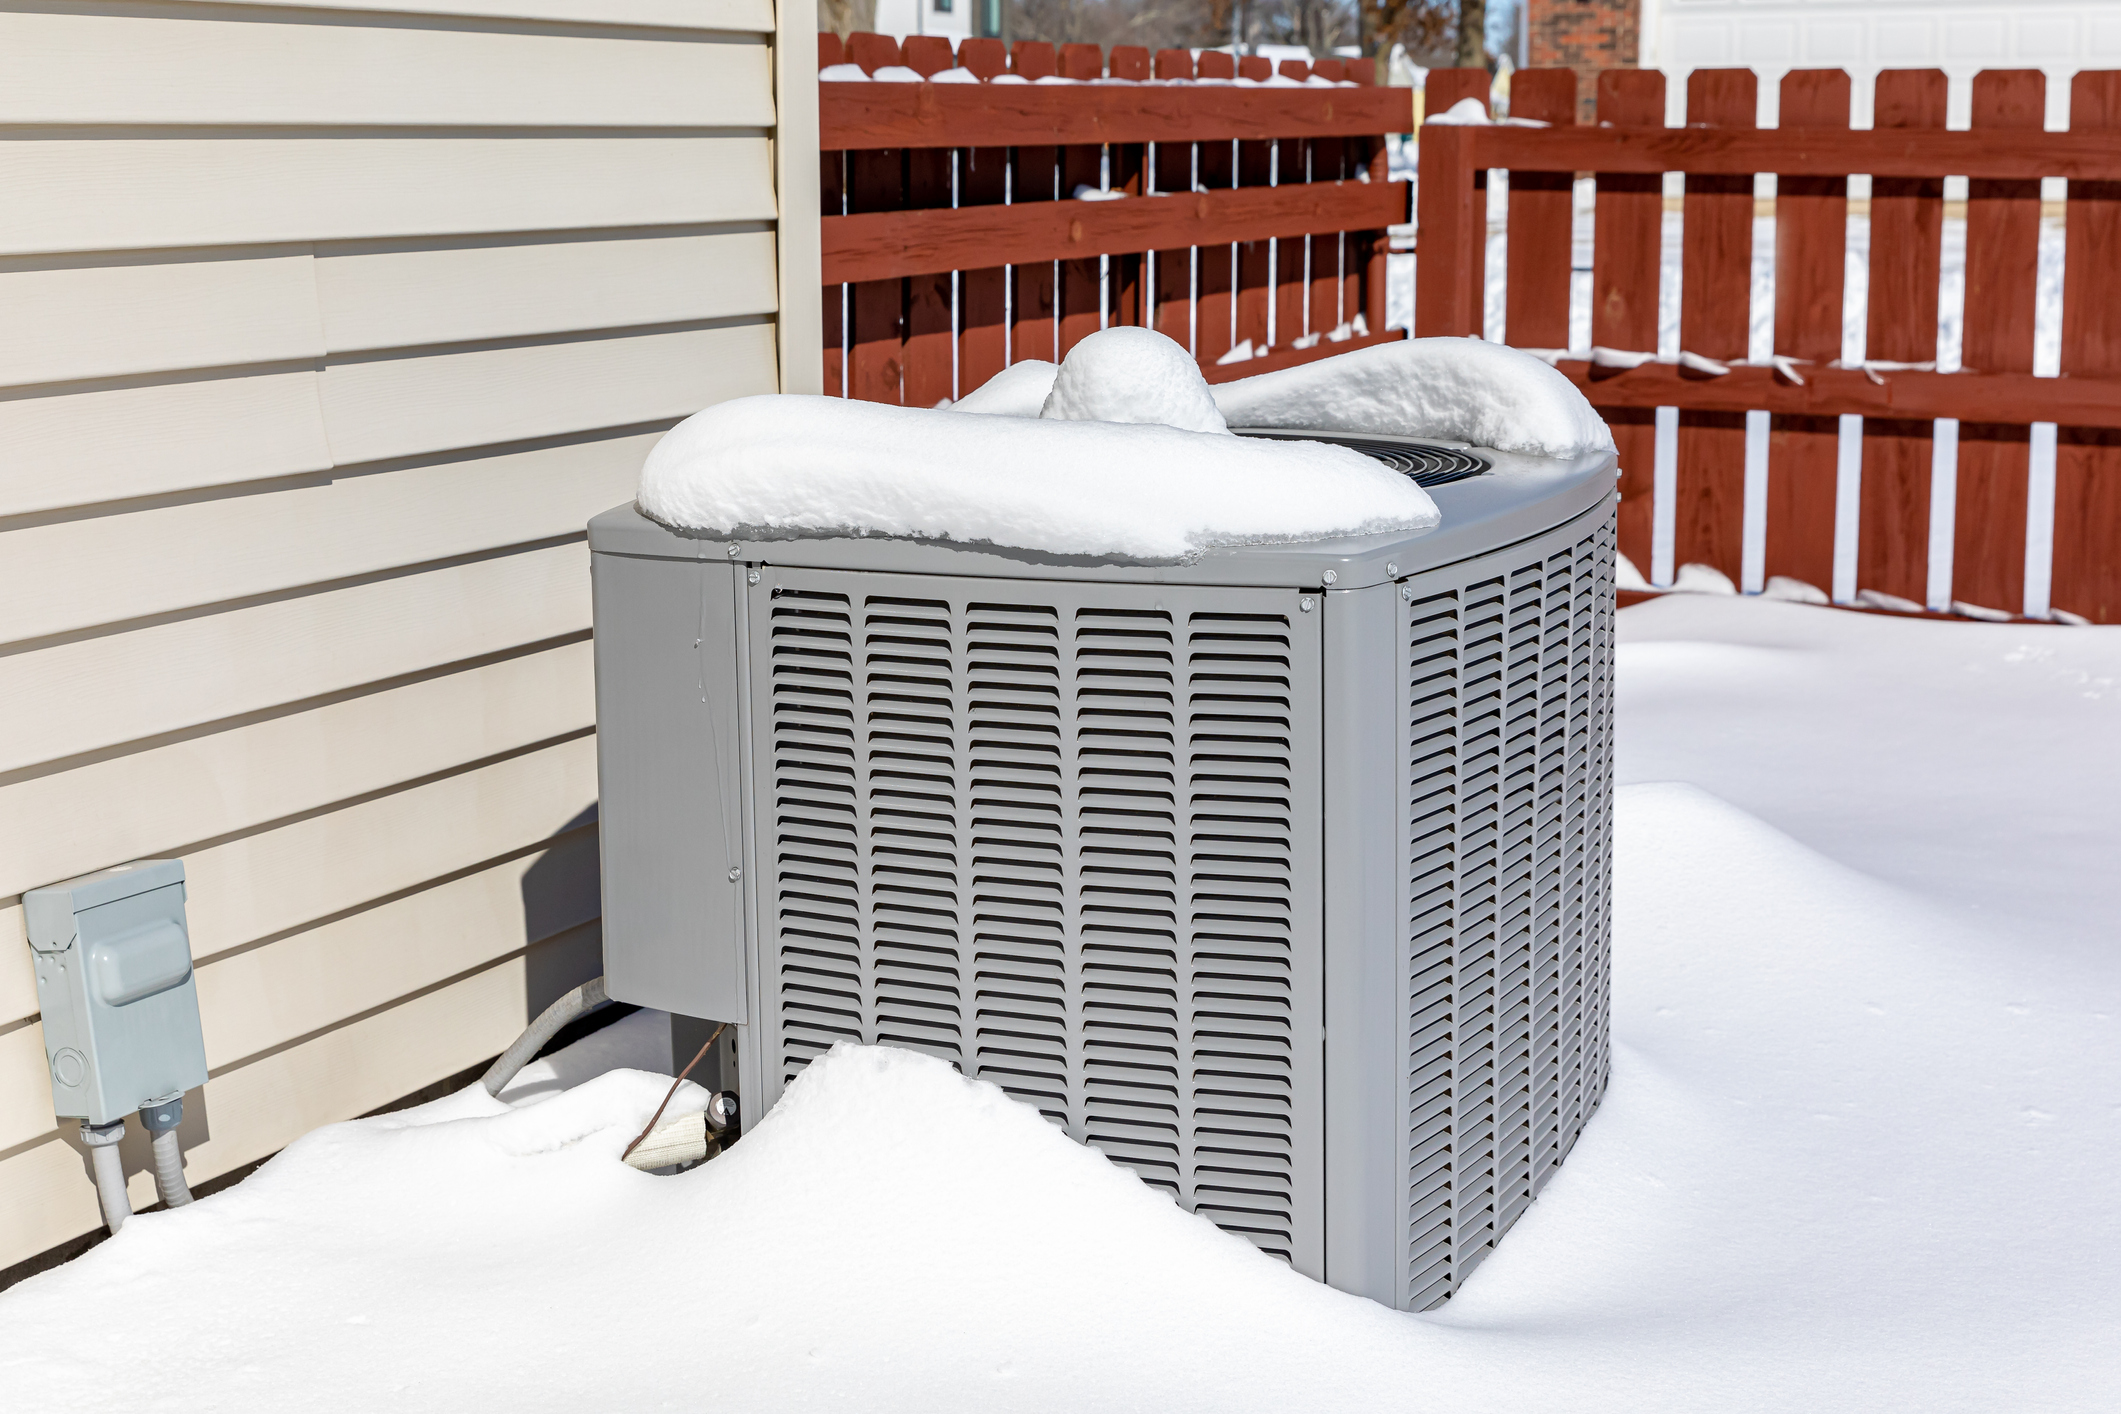 AC unit covered in snow outside a Wyoming home